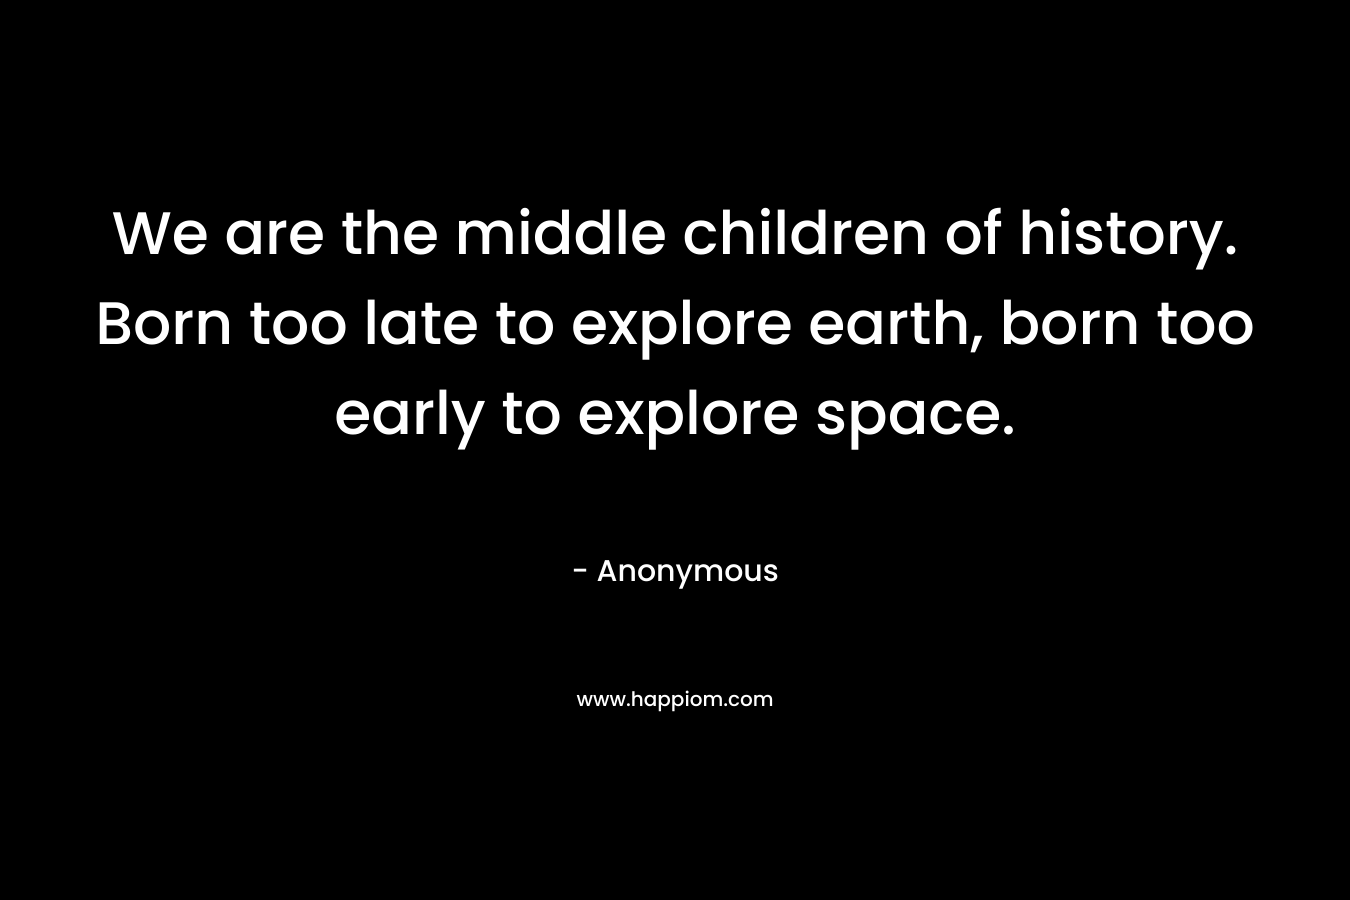 We are the middle children of history. Born too late to explore earth, born too early to explore space.